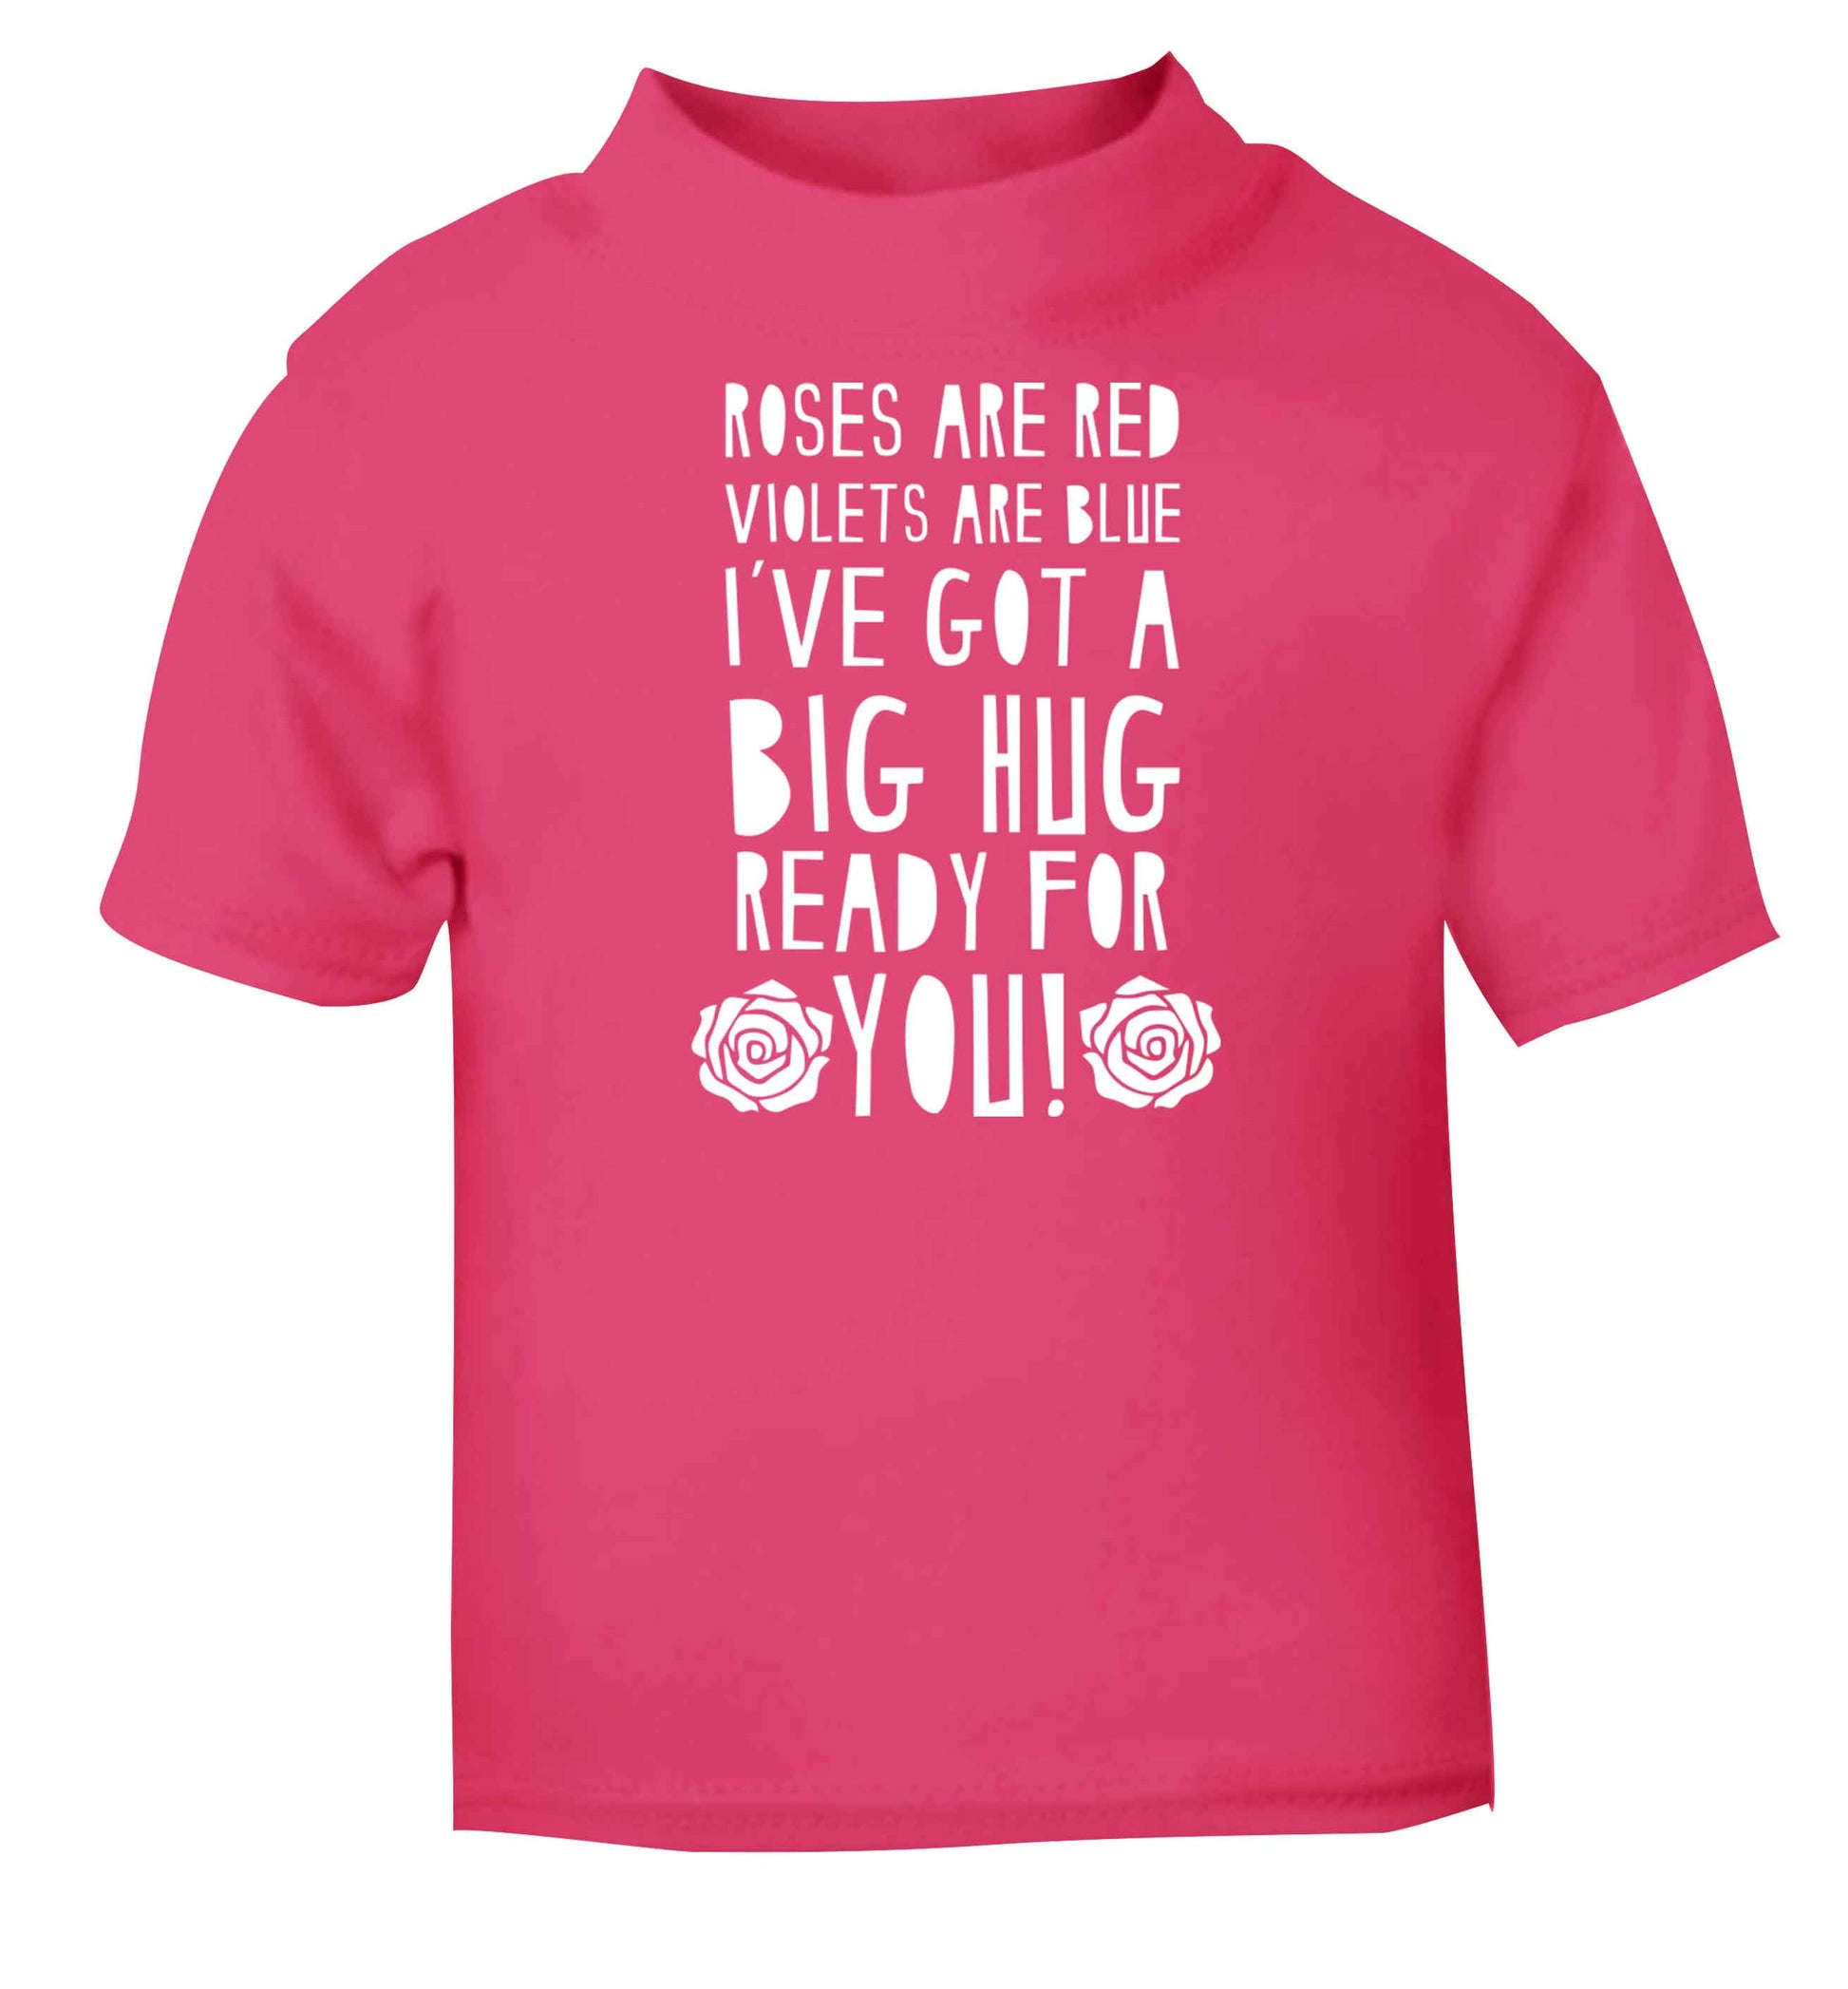 Roses are red violets are blue I've got a big hug coming for you pink baby toddler Tshirt 2 Years